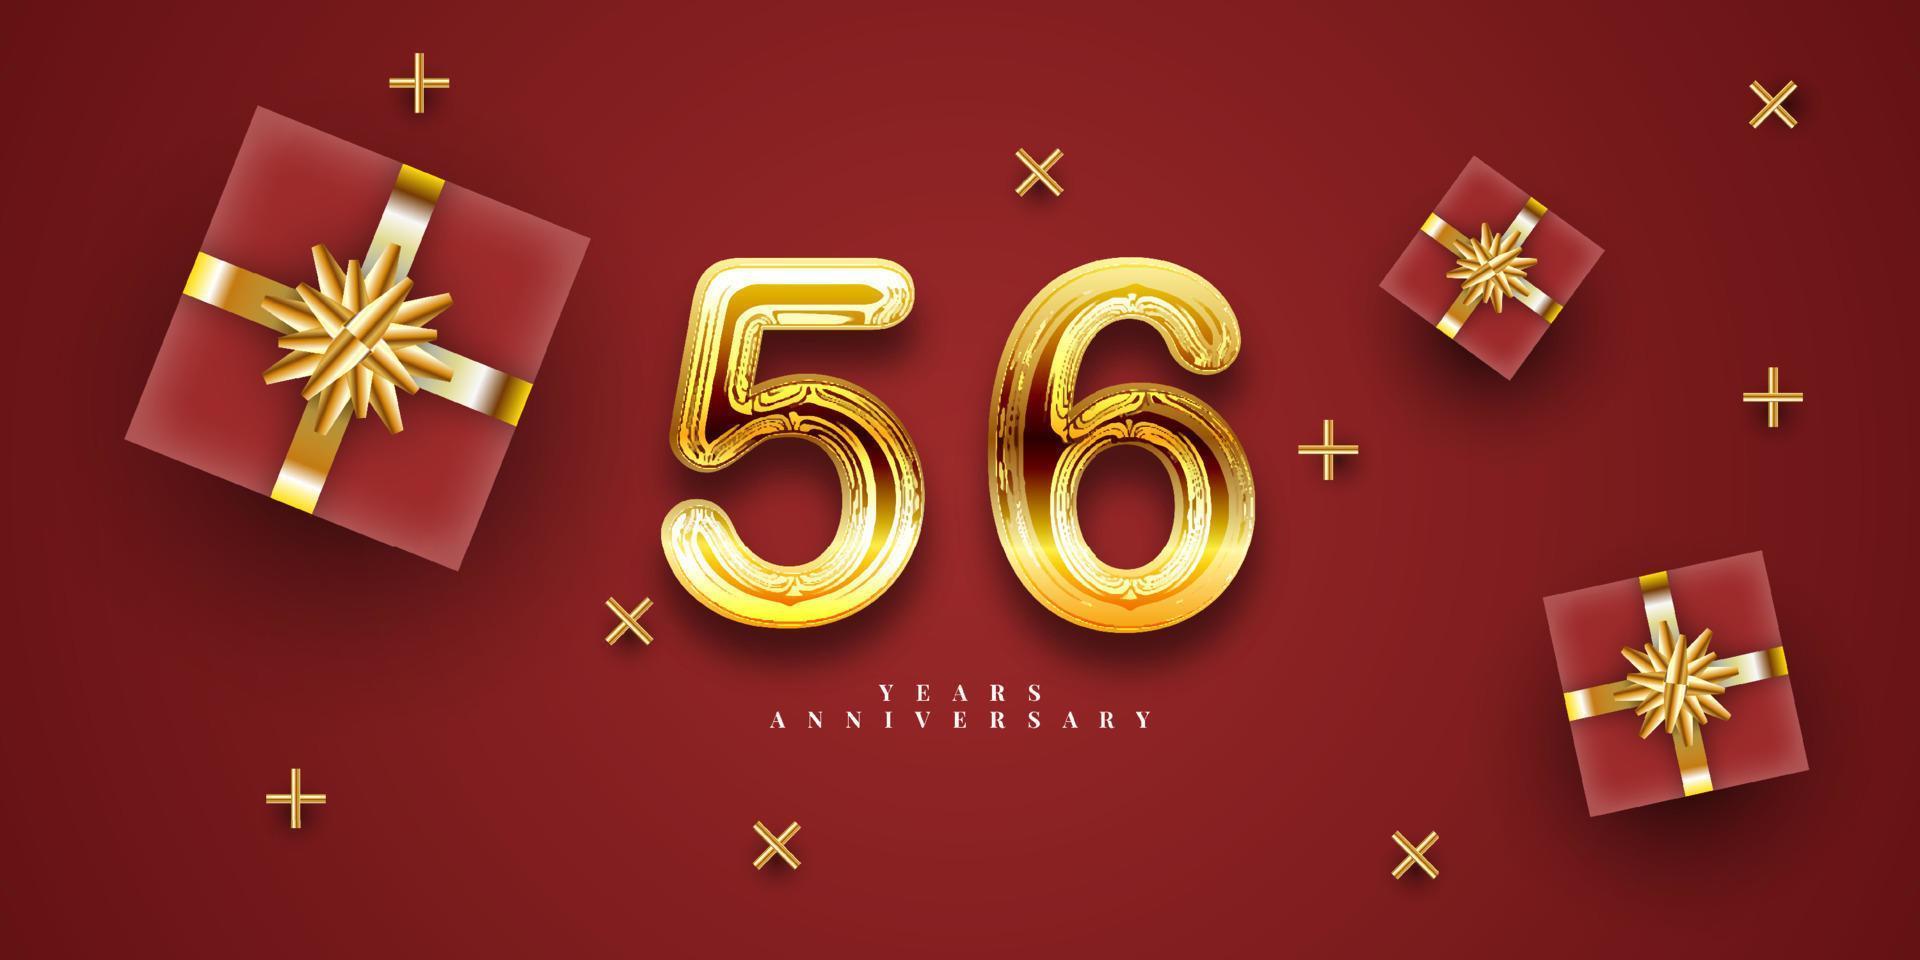 56 Years anniversary golden number with gift box gift vector